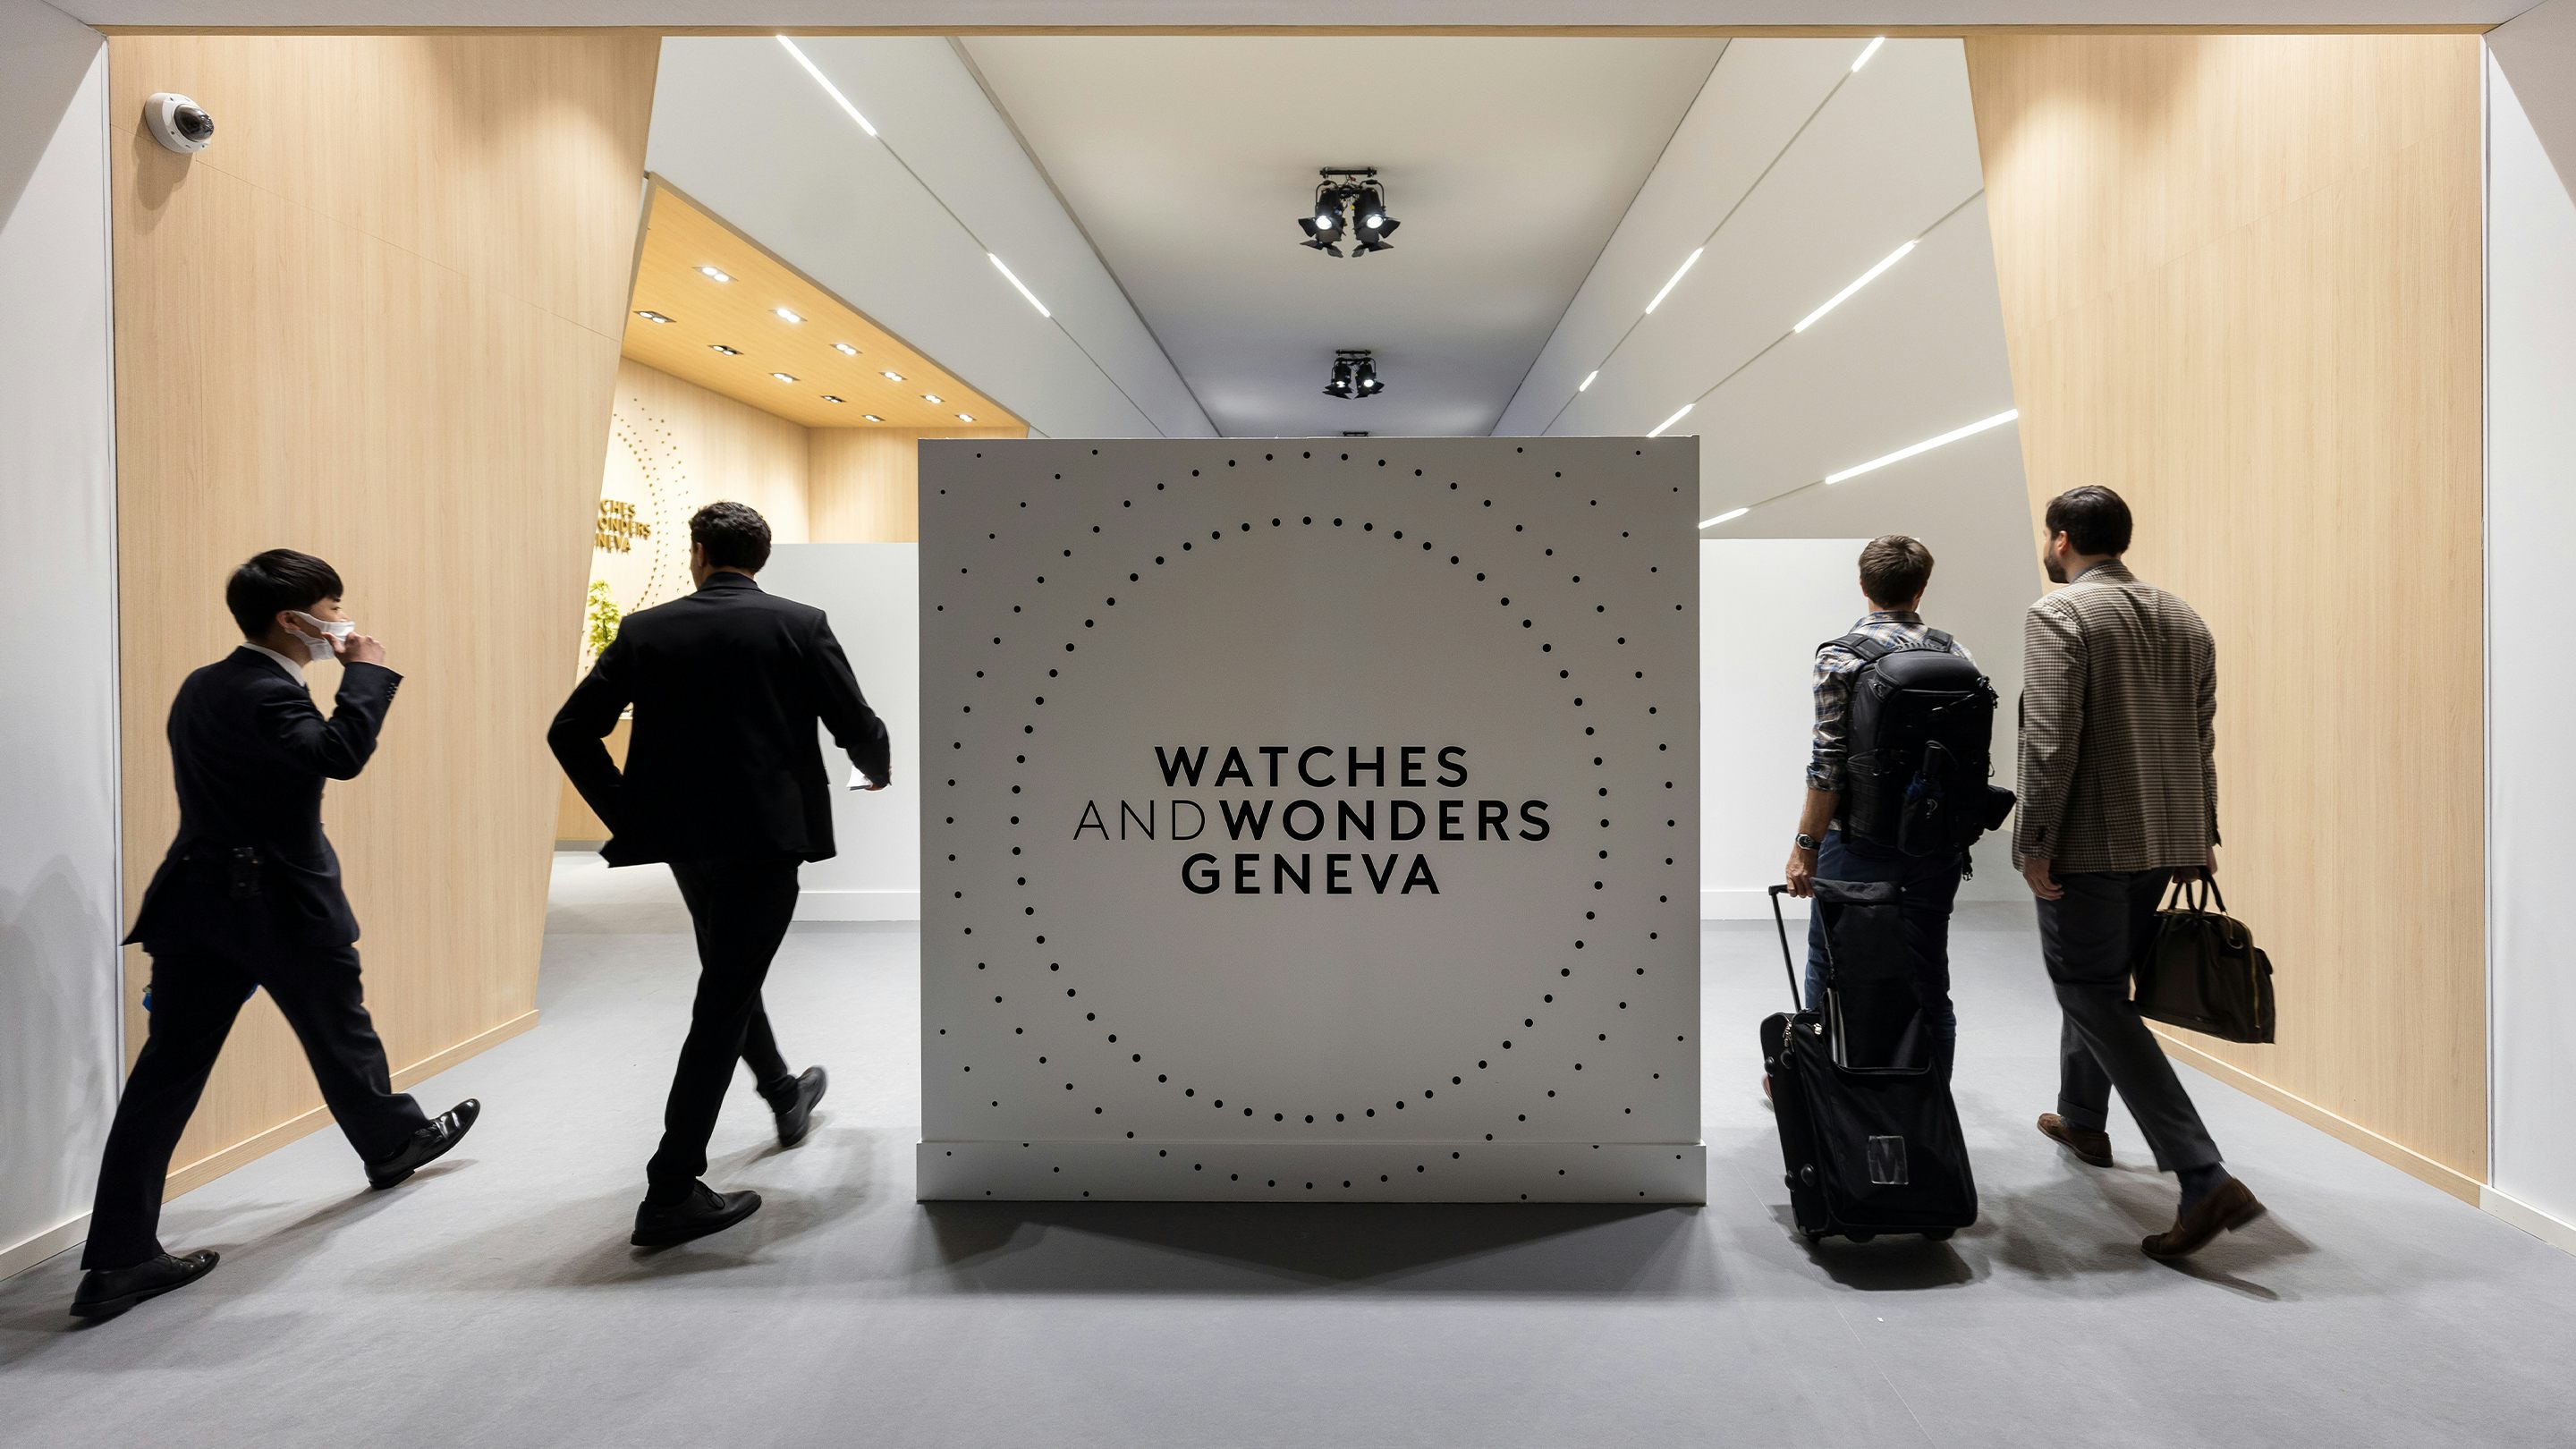 A new list of watches to check out this March 2023